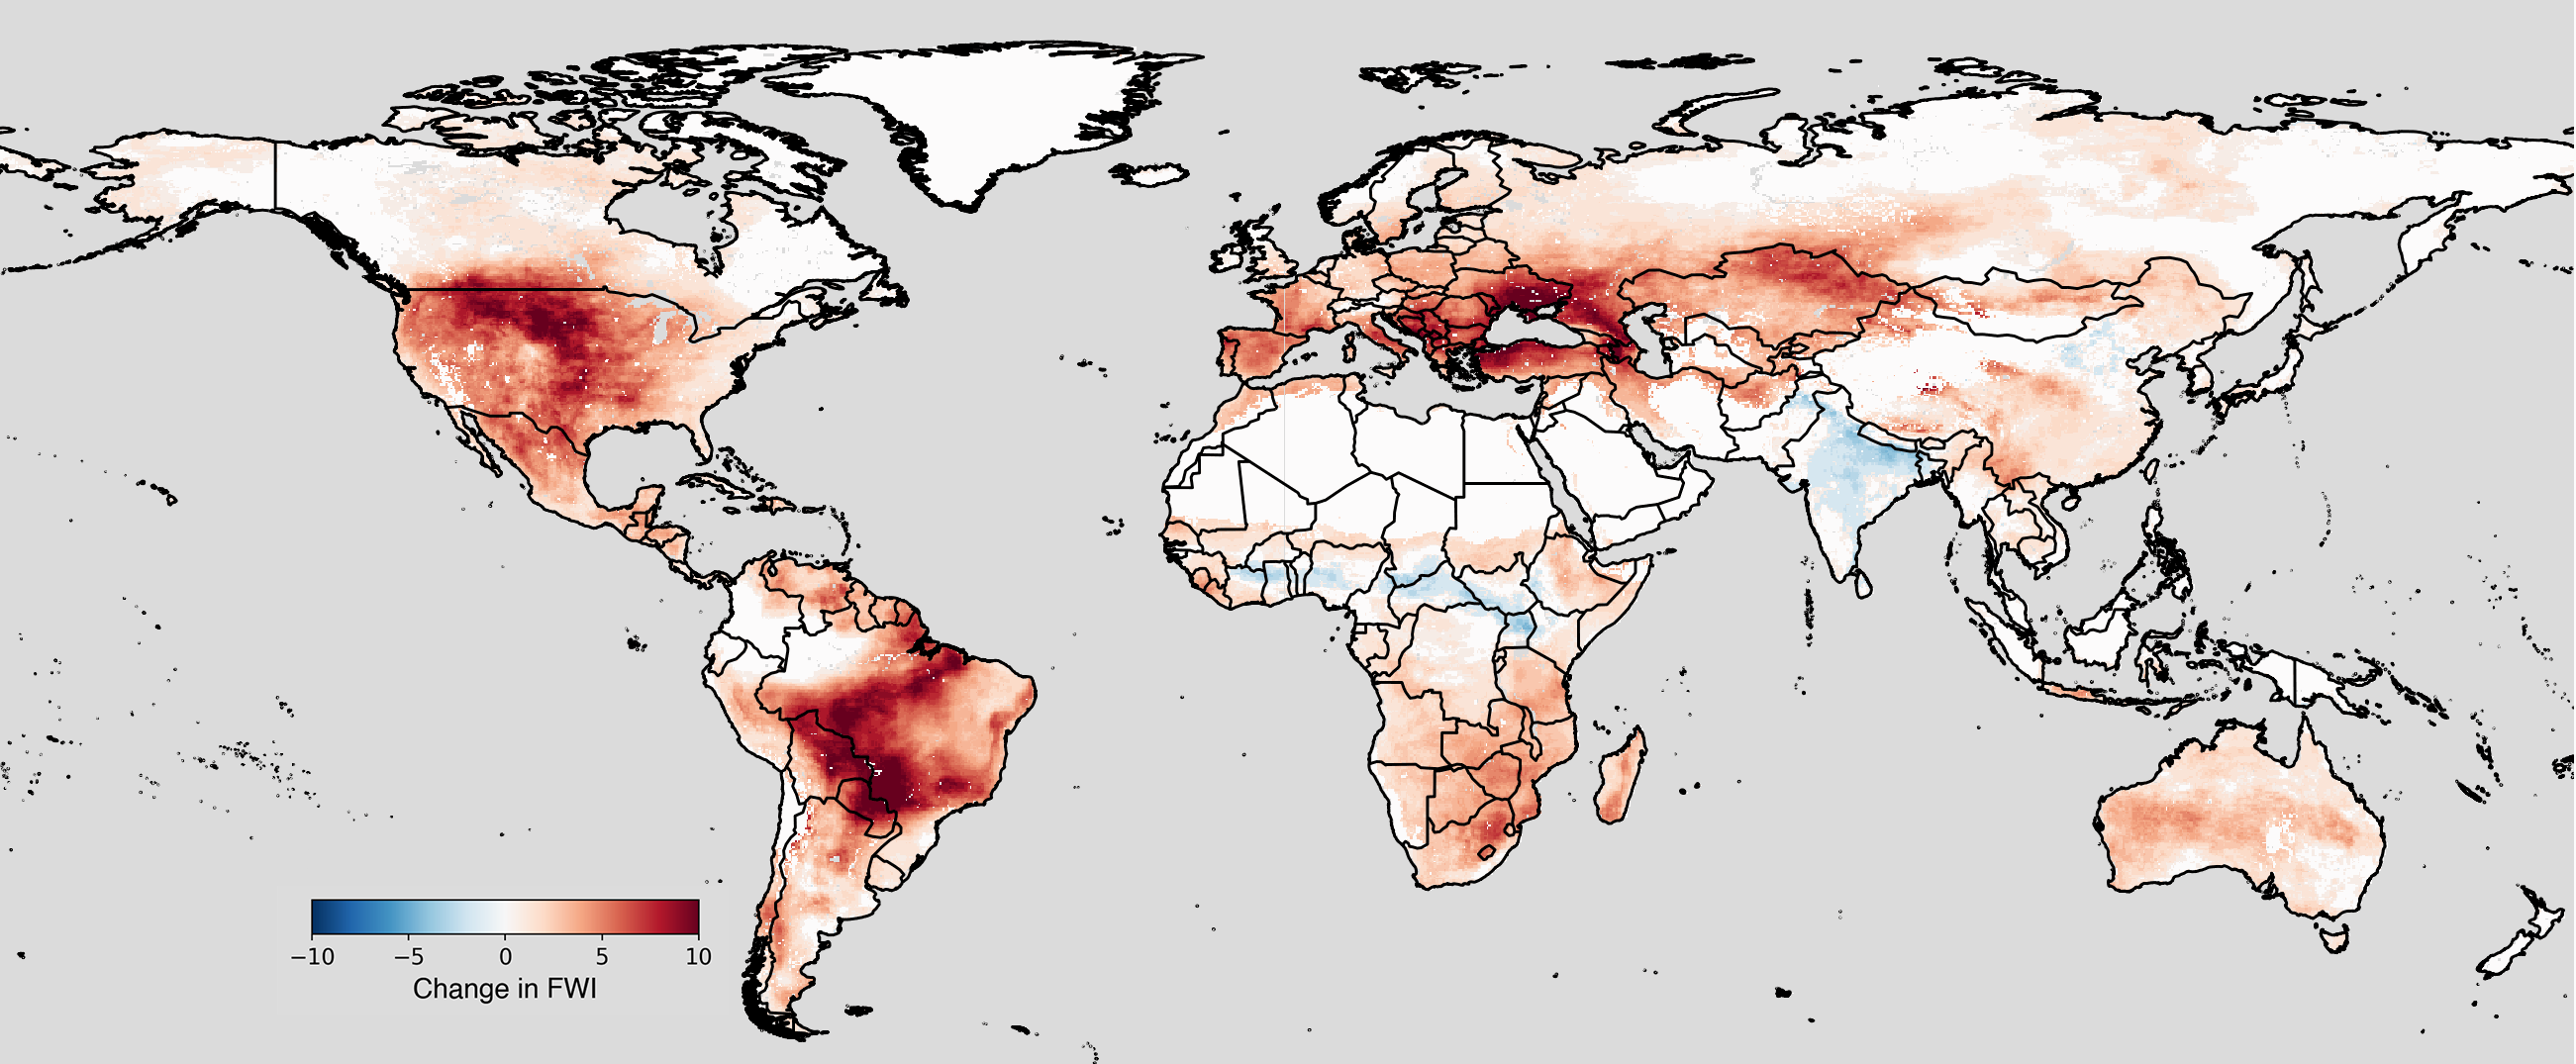 Map showing change in fire weather index around the world projected for the year 2045 with respect to the baseline period of 1950-1979. Red: greater extreme fire weather; blue: less.